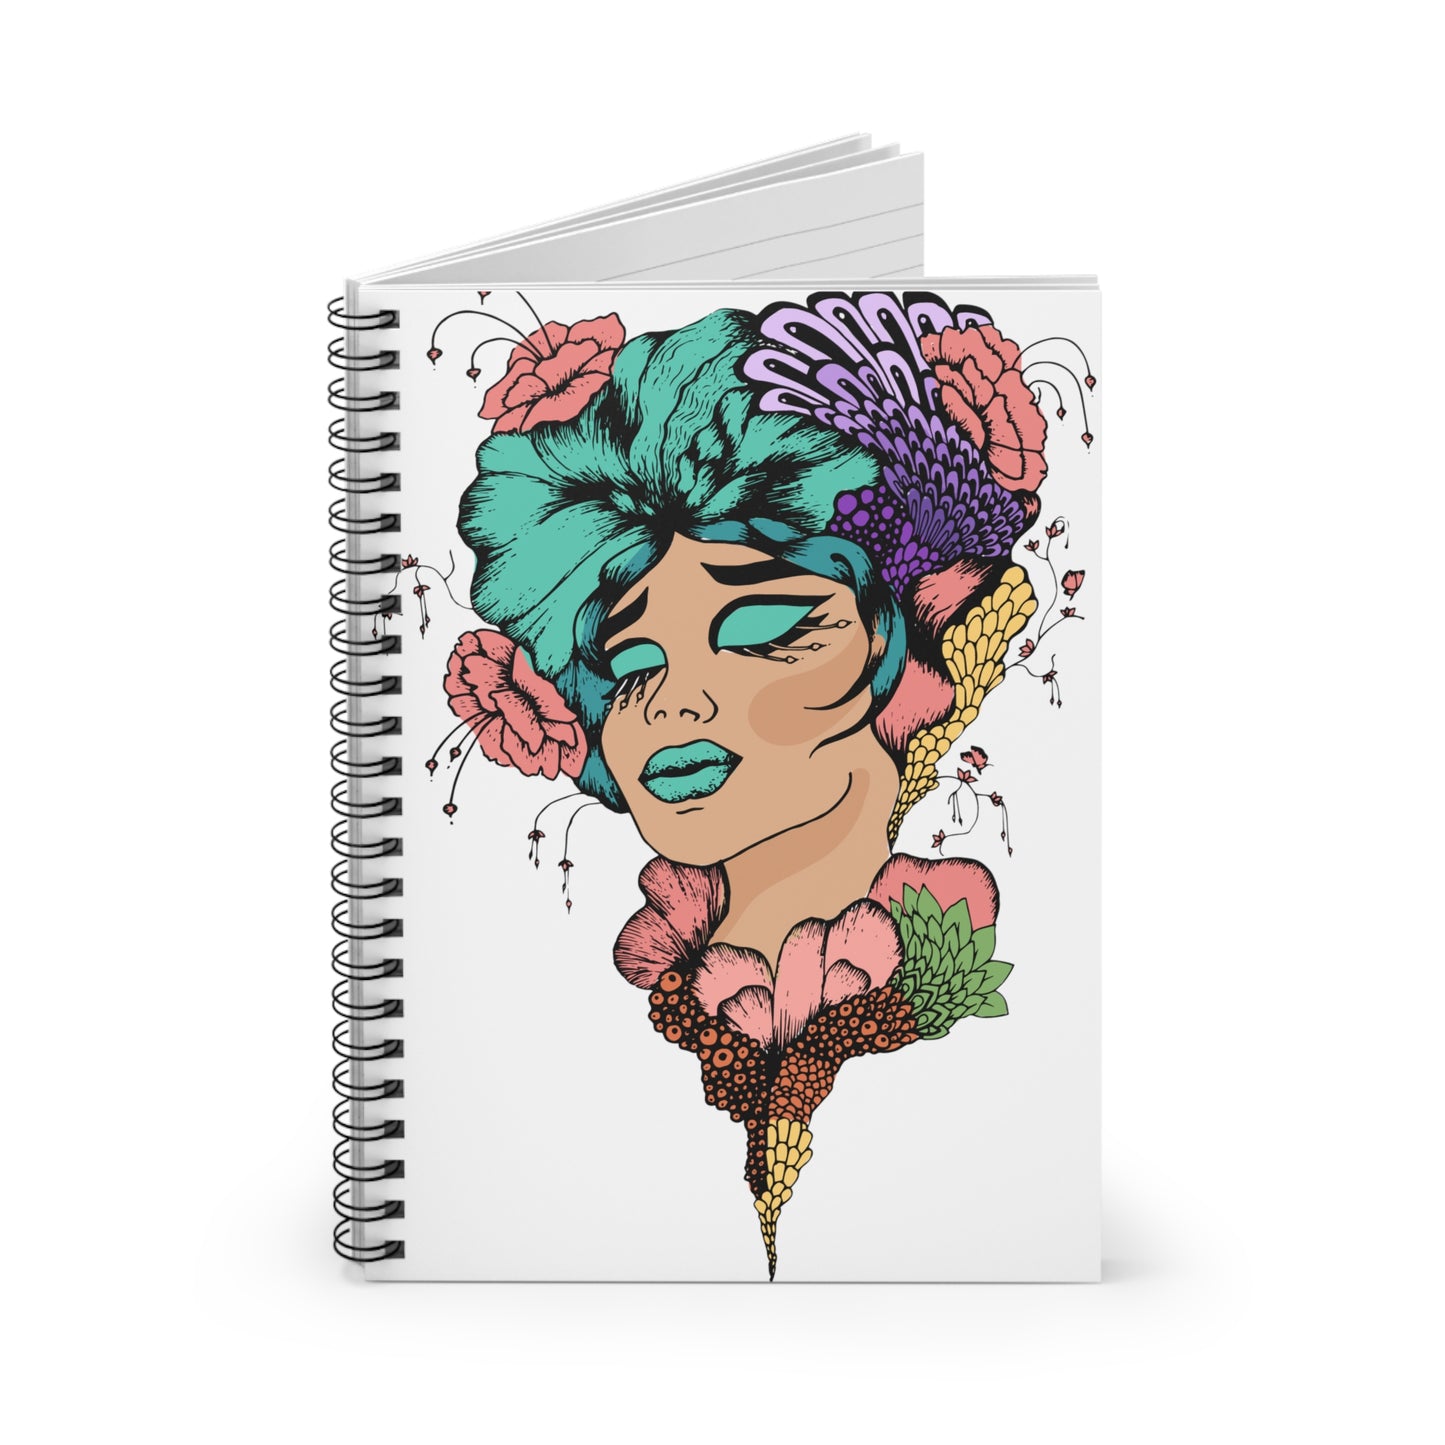 Floral Woman Spiral Notebook - Ruled Line